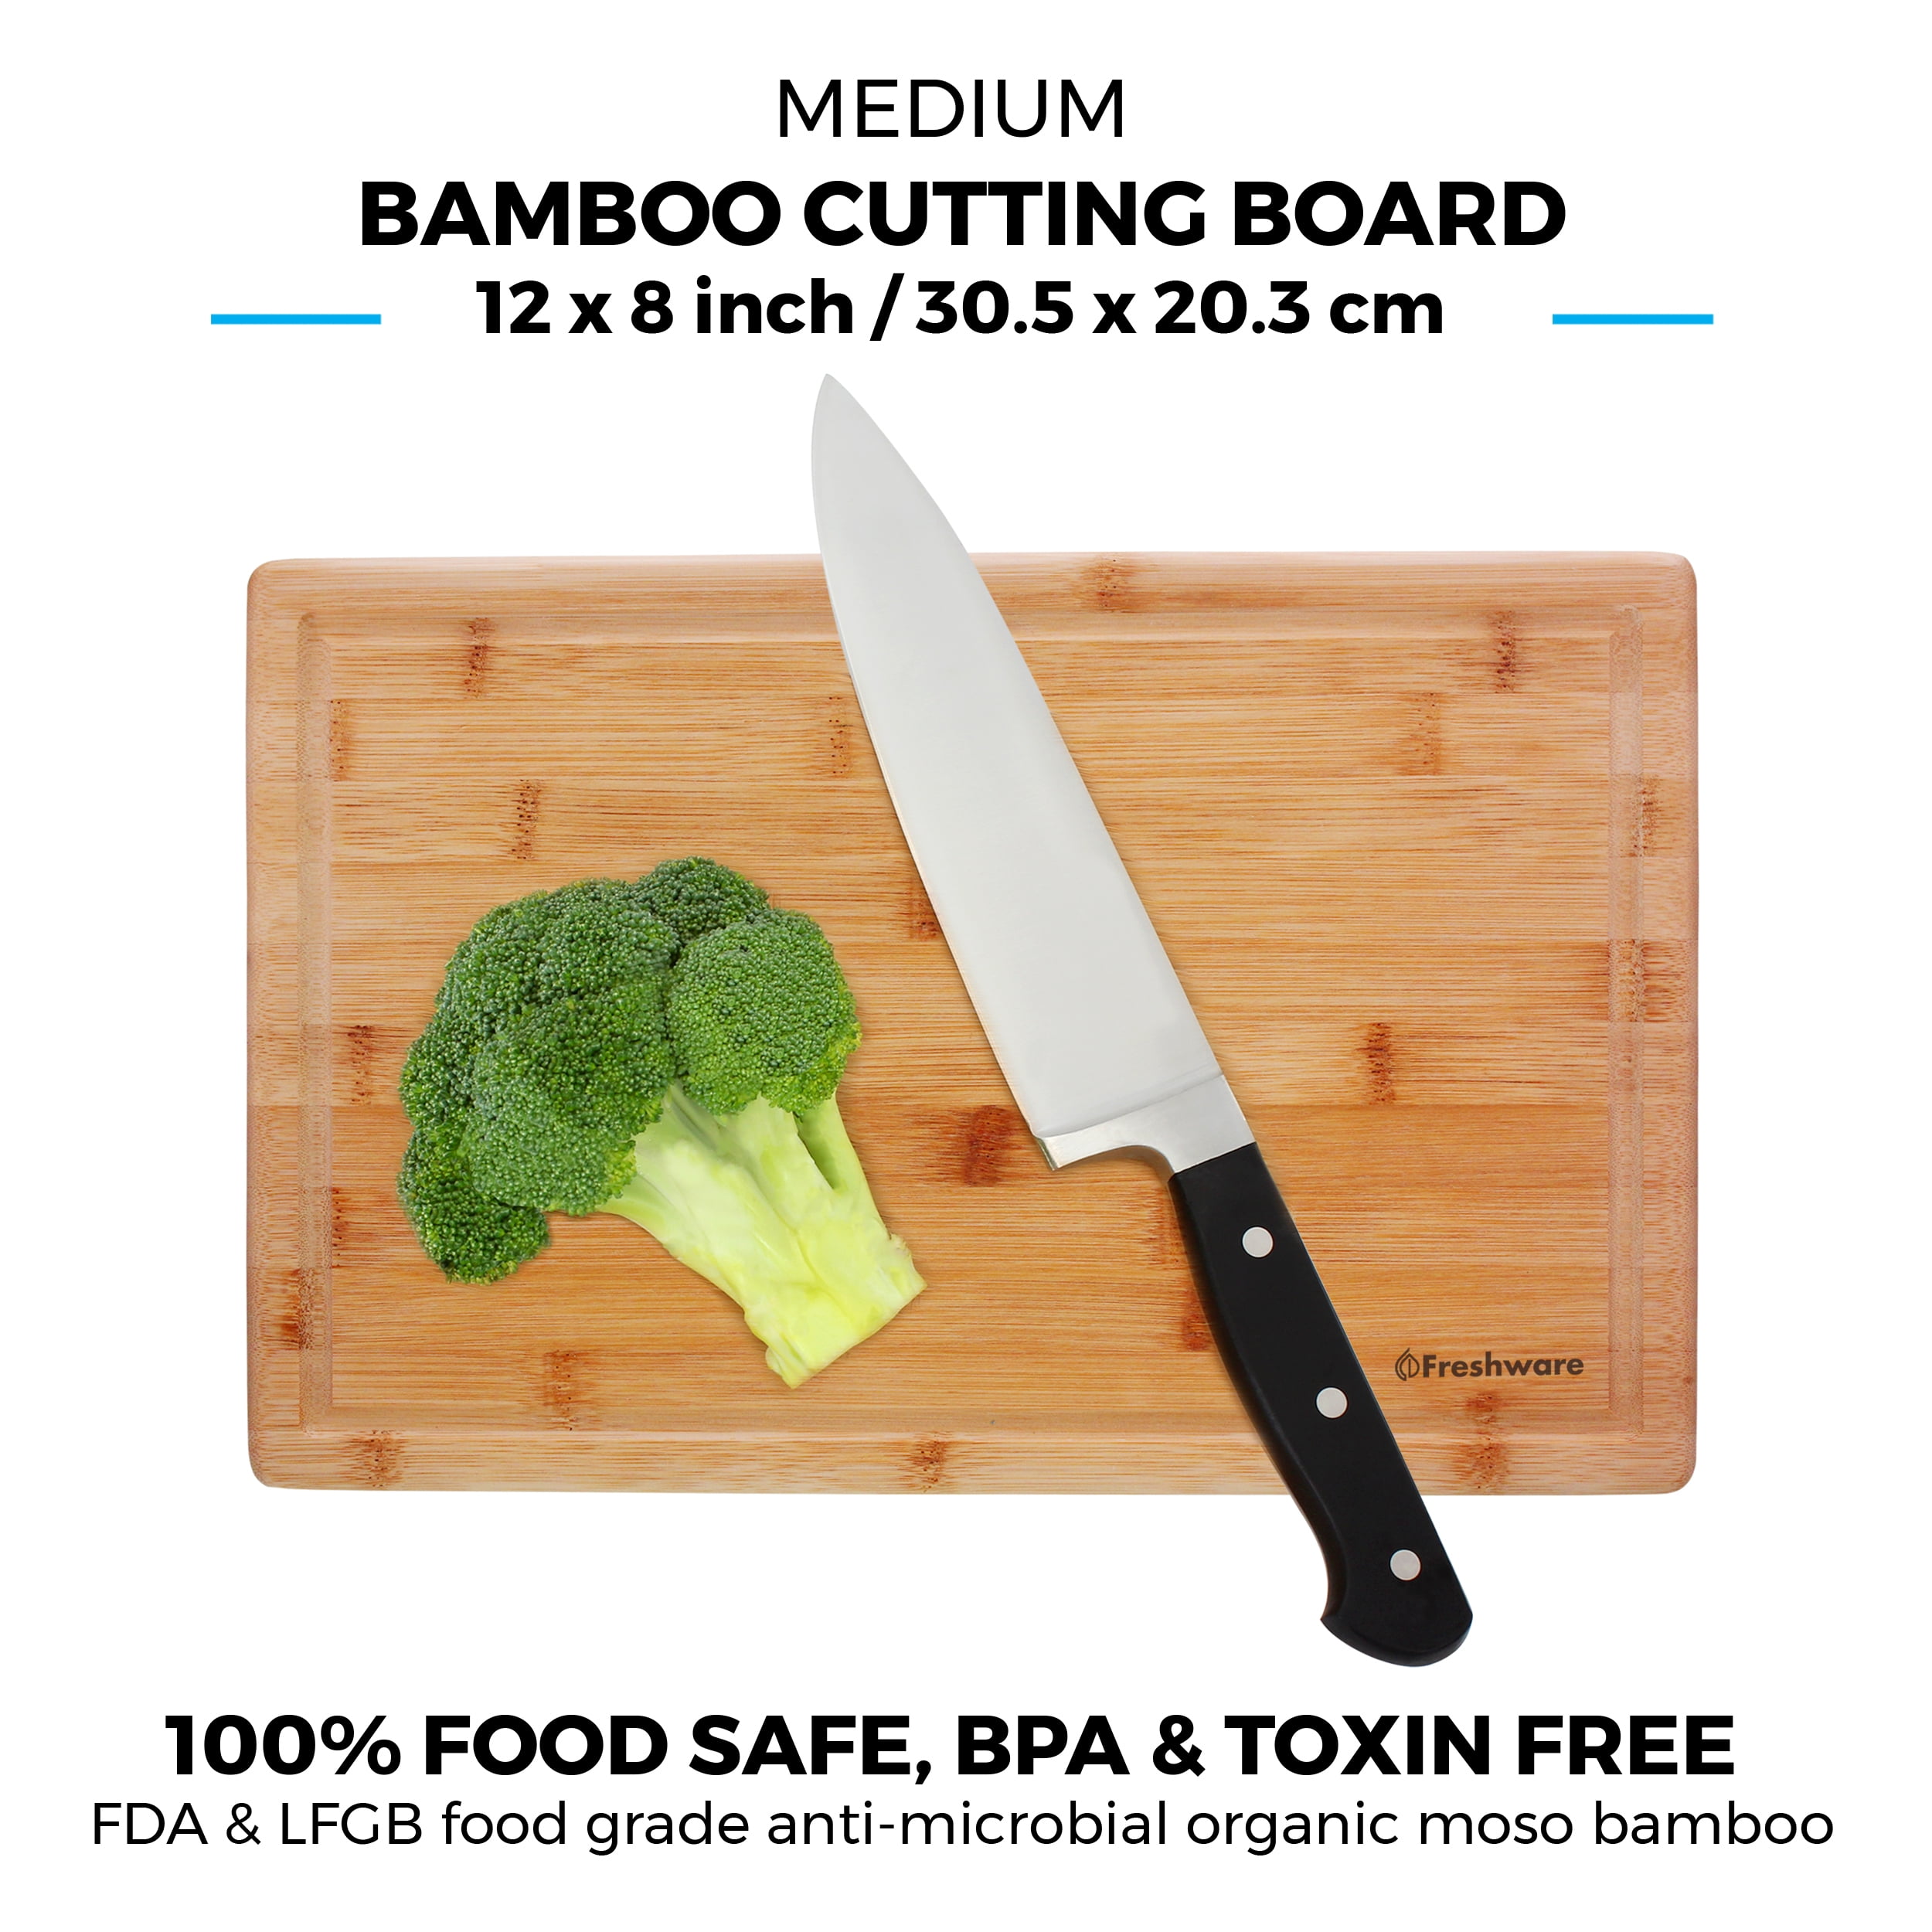 Nature Tek 14.5 x 10.8 inch Chopboard, 1 Double-Sided Cutting Board - Durable, withstands Temperatures Up to 350F, Kraft Wood Fiber Cutting Board, Dis